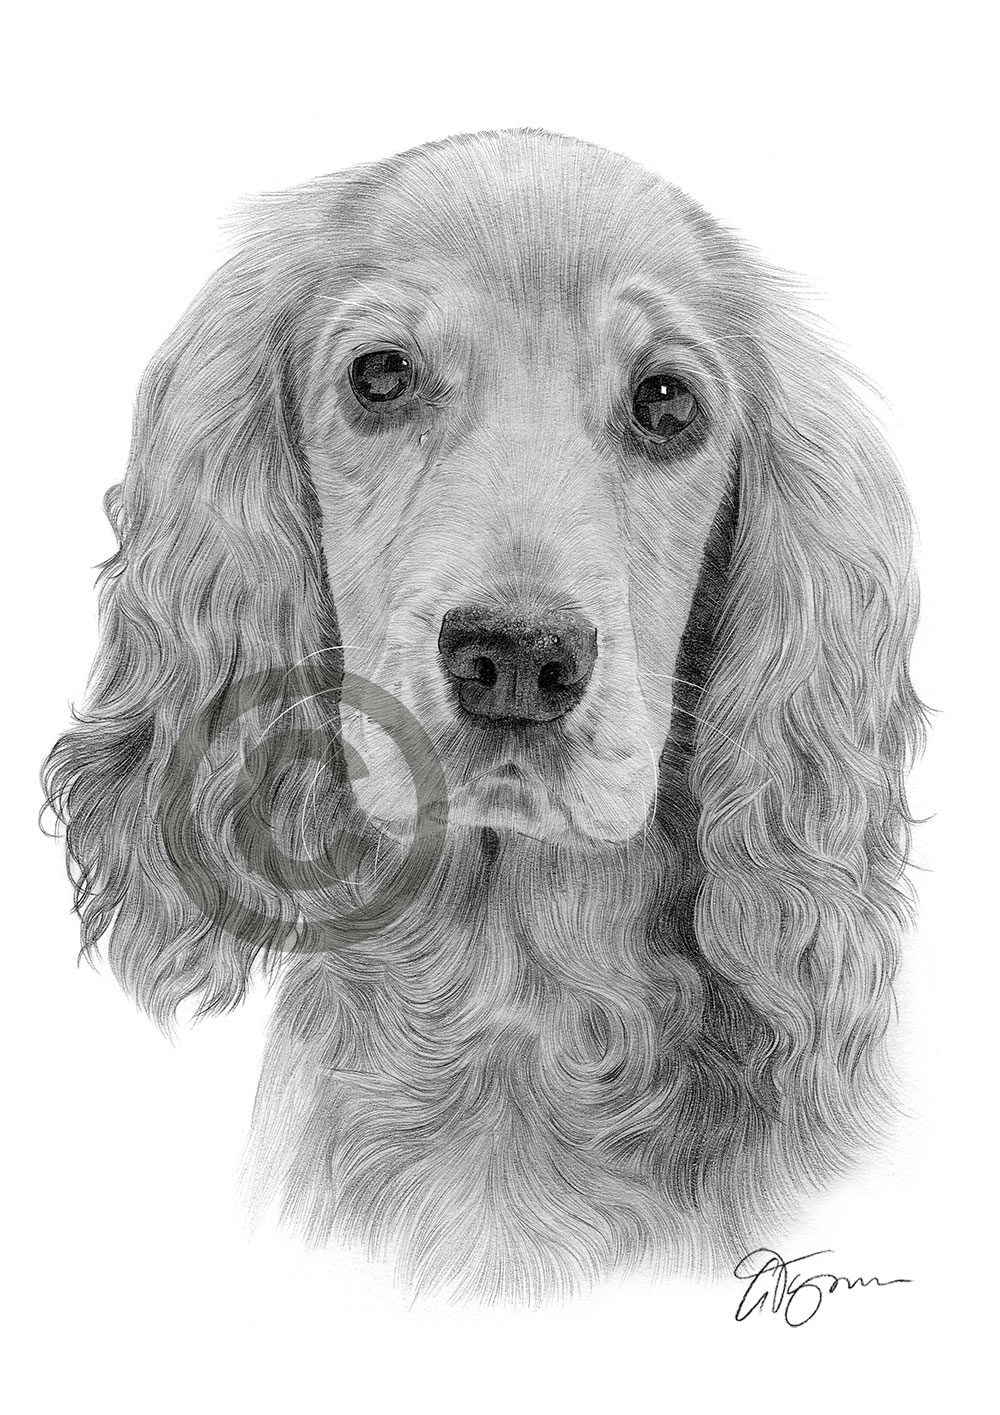 Pencil drawing of a young cocker spaniel by artist Gary Tymon